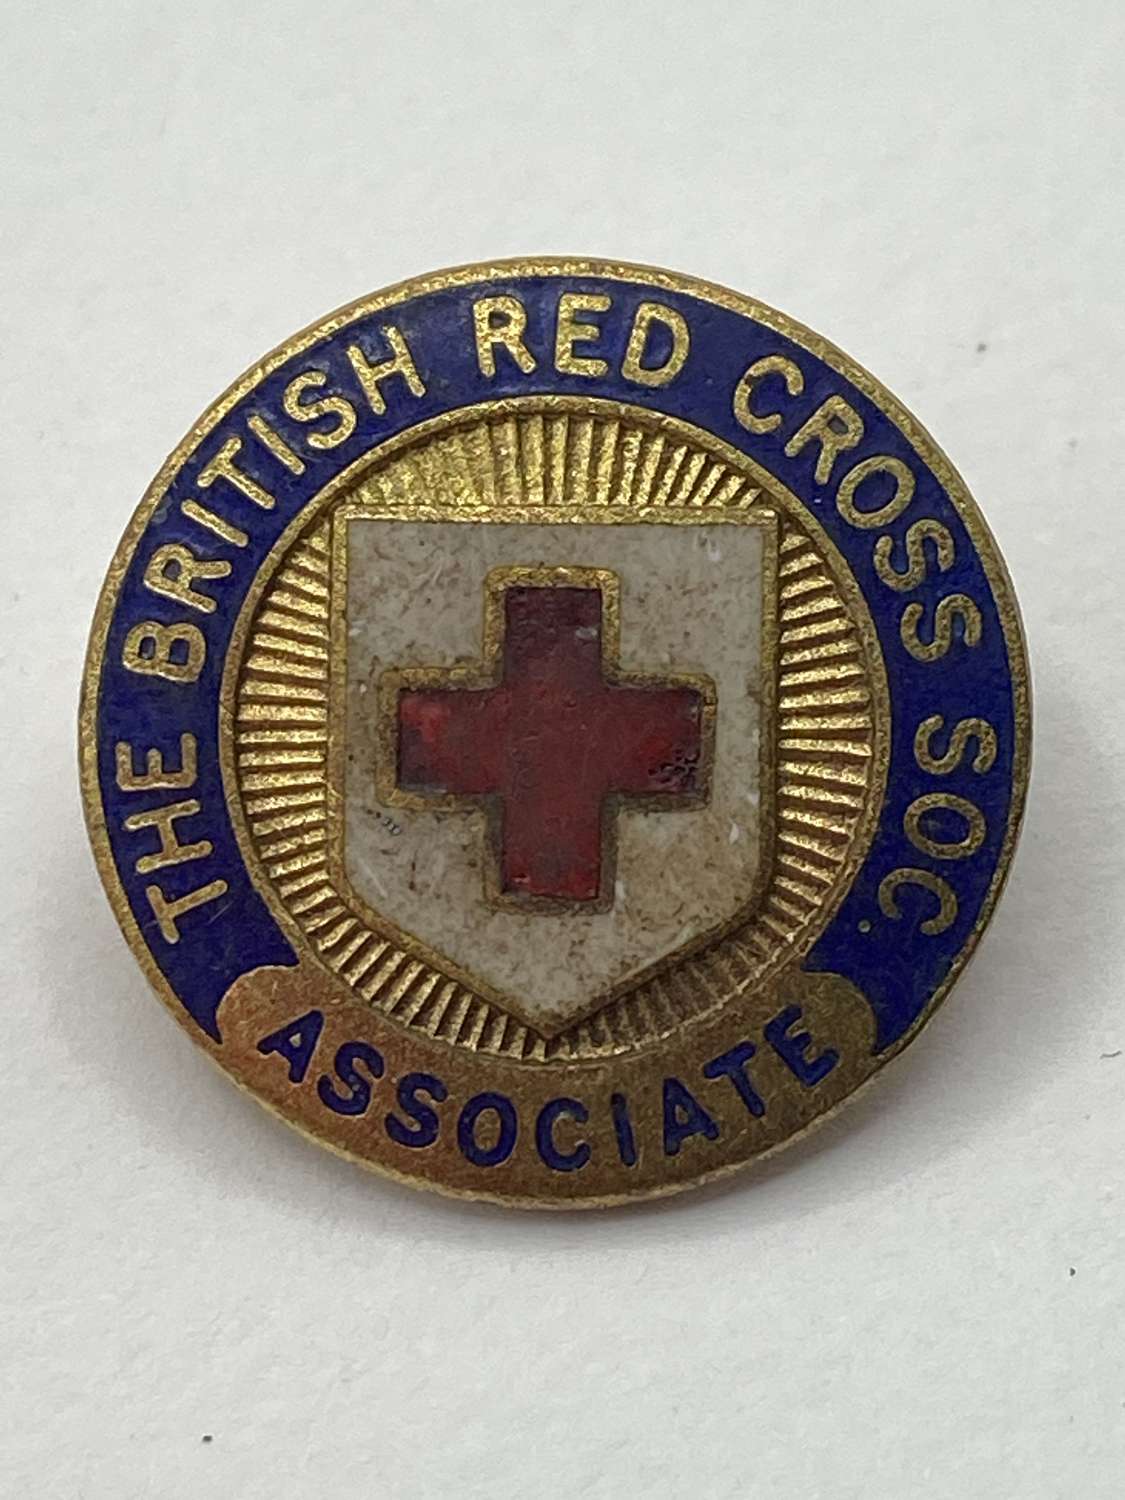 WW2 British Home Front Red Cross Society Associate Badge by J R Gaunt